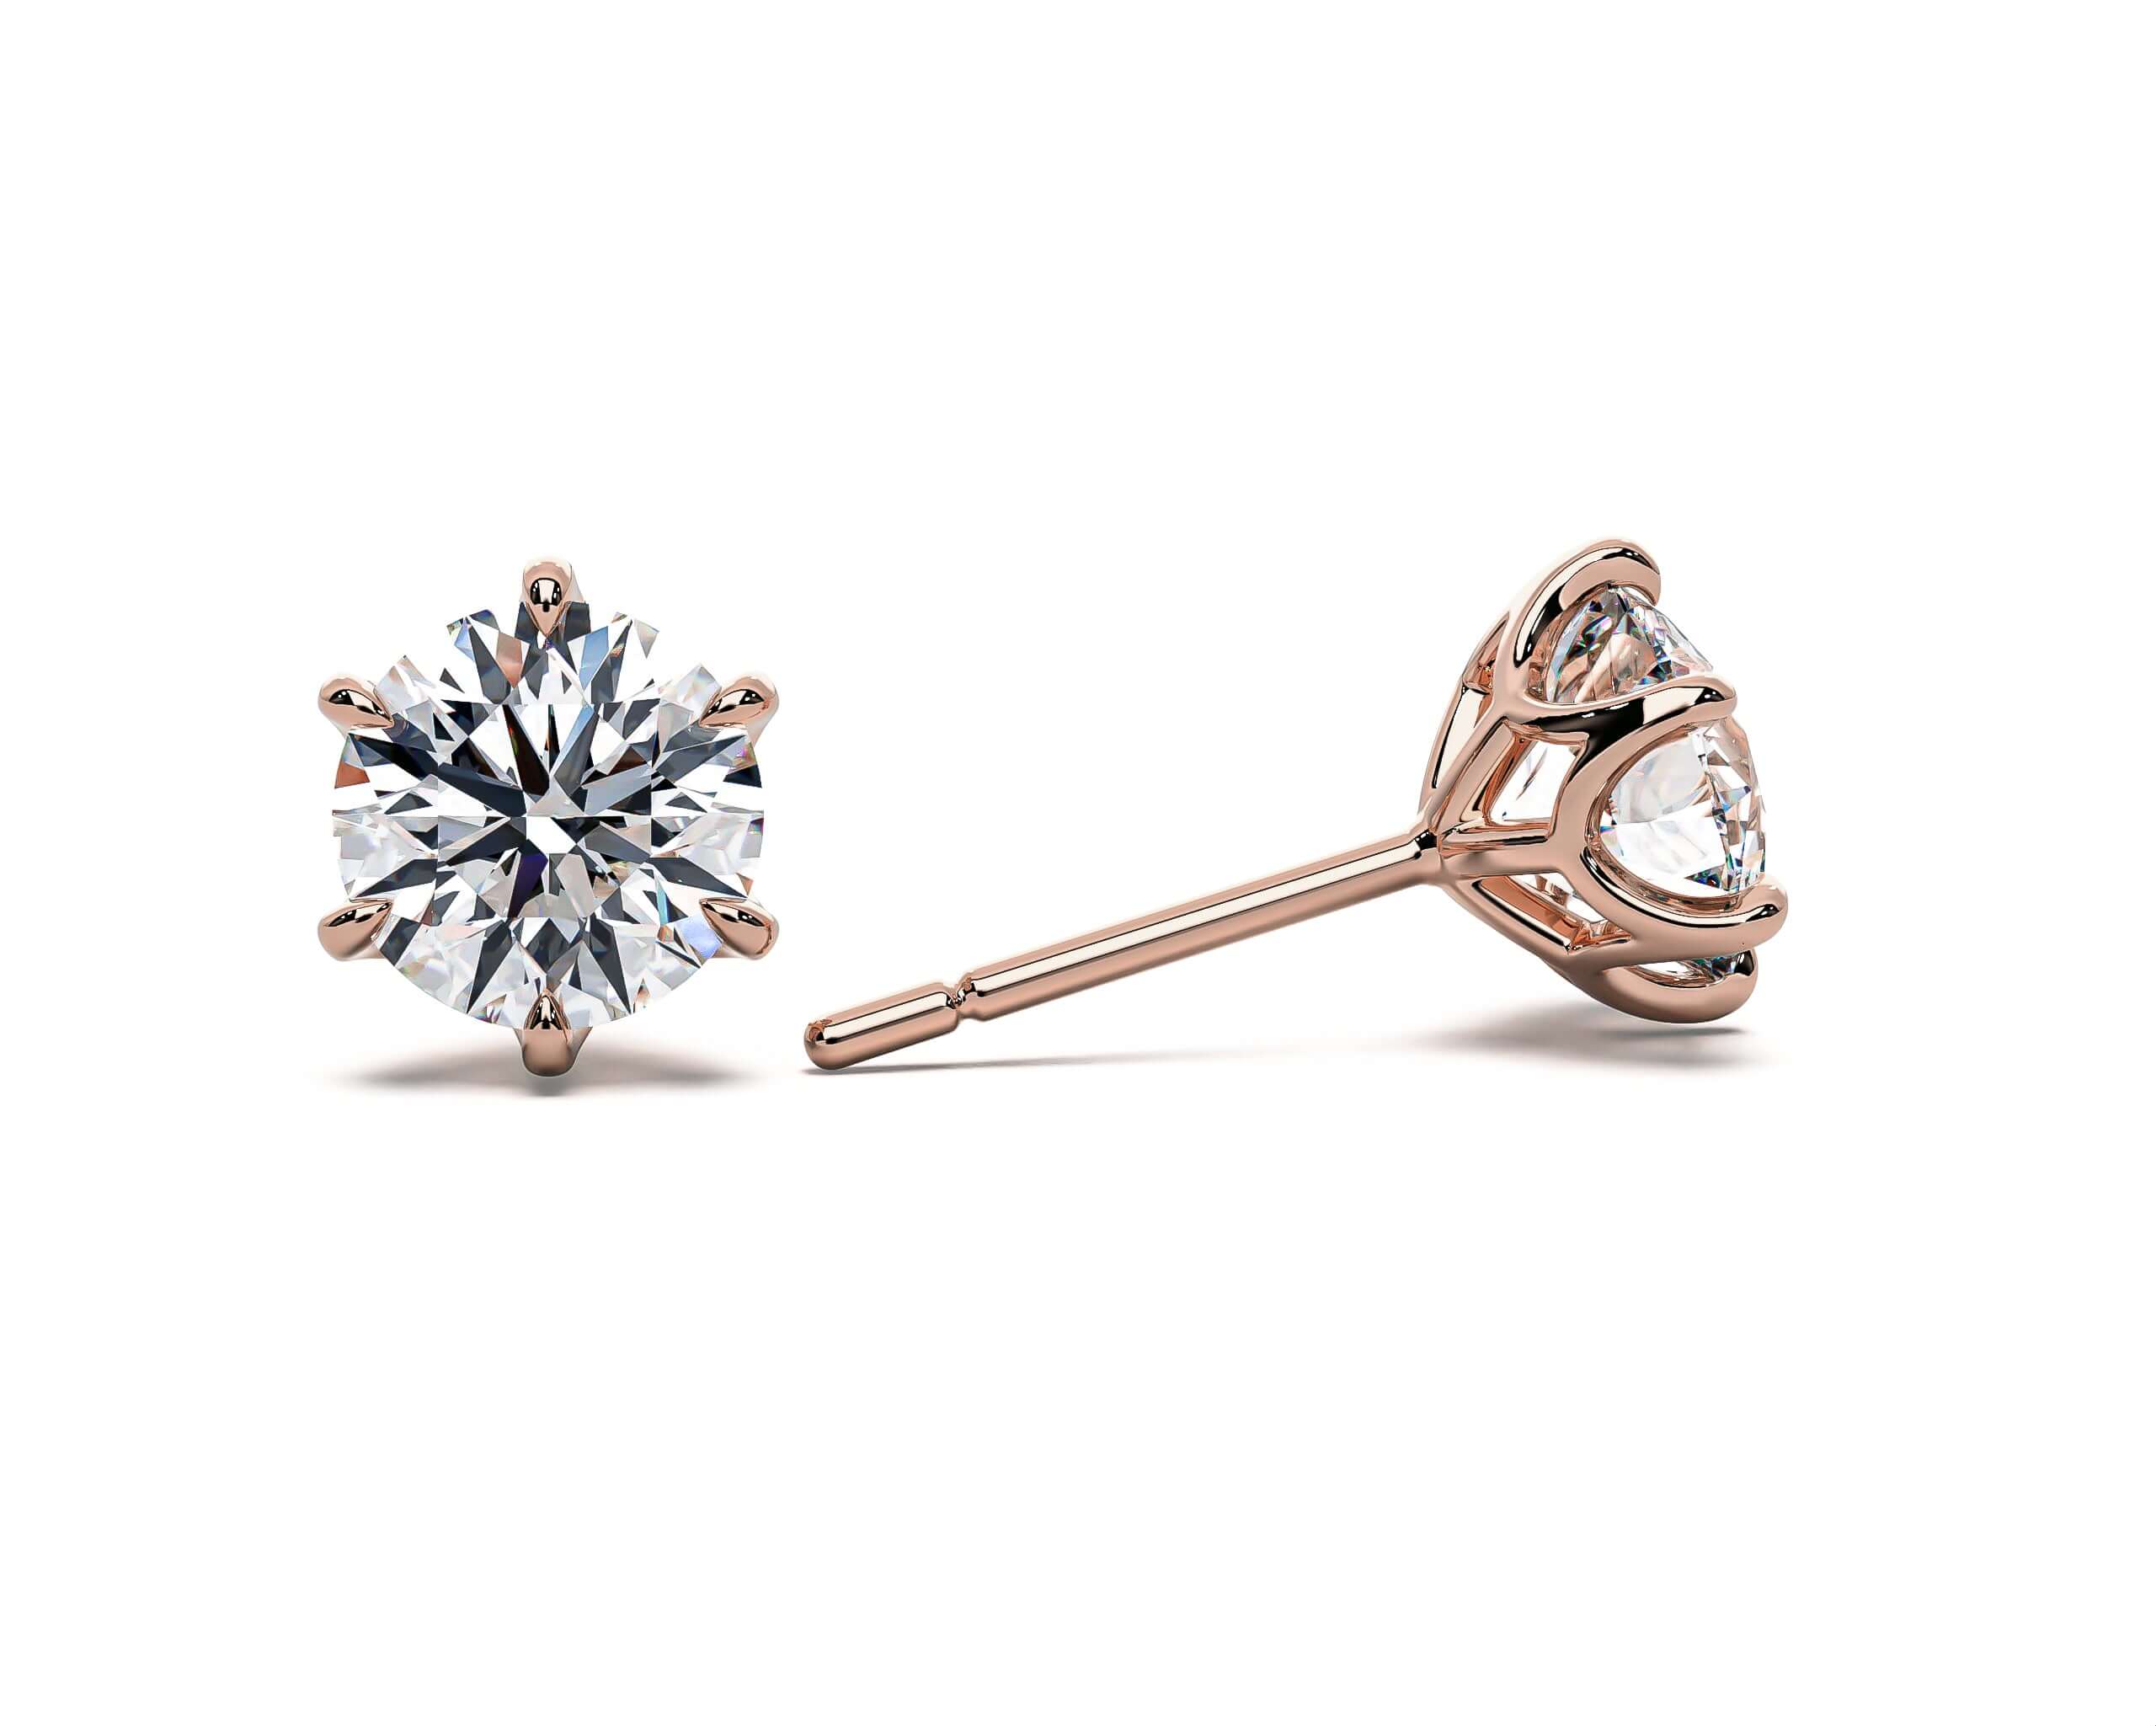 LAB LUXE - Round brilliant six claw Lab grown diamond earrings